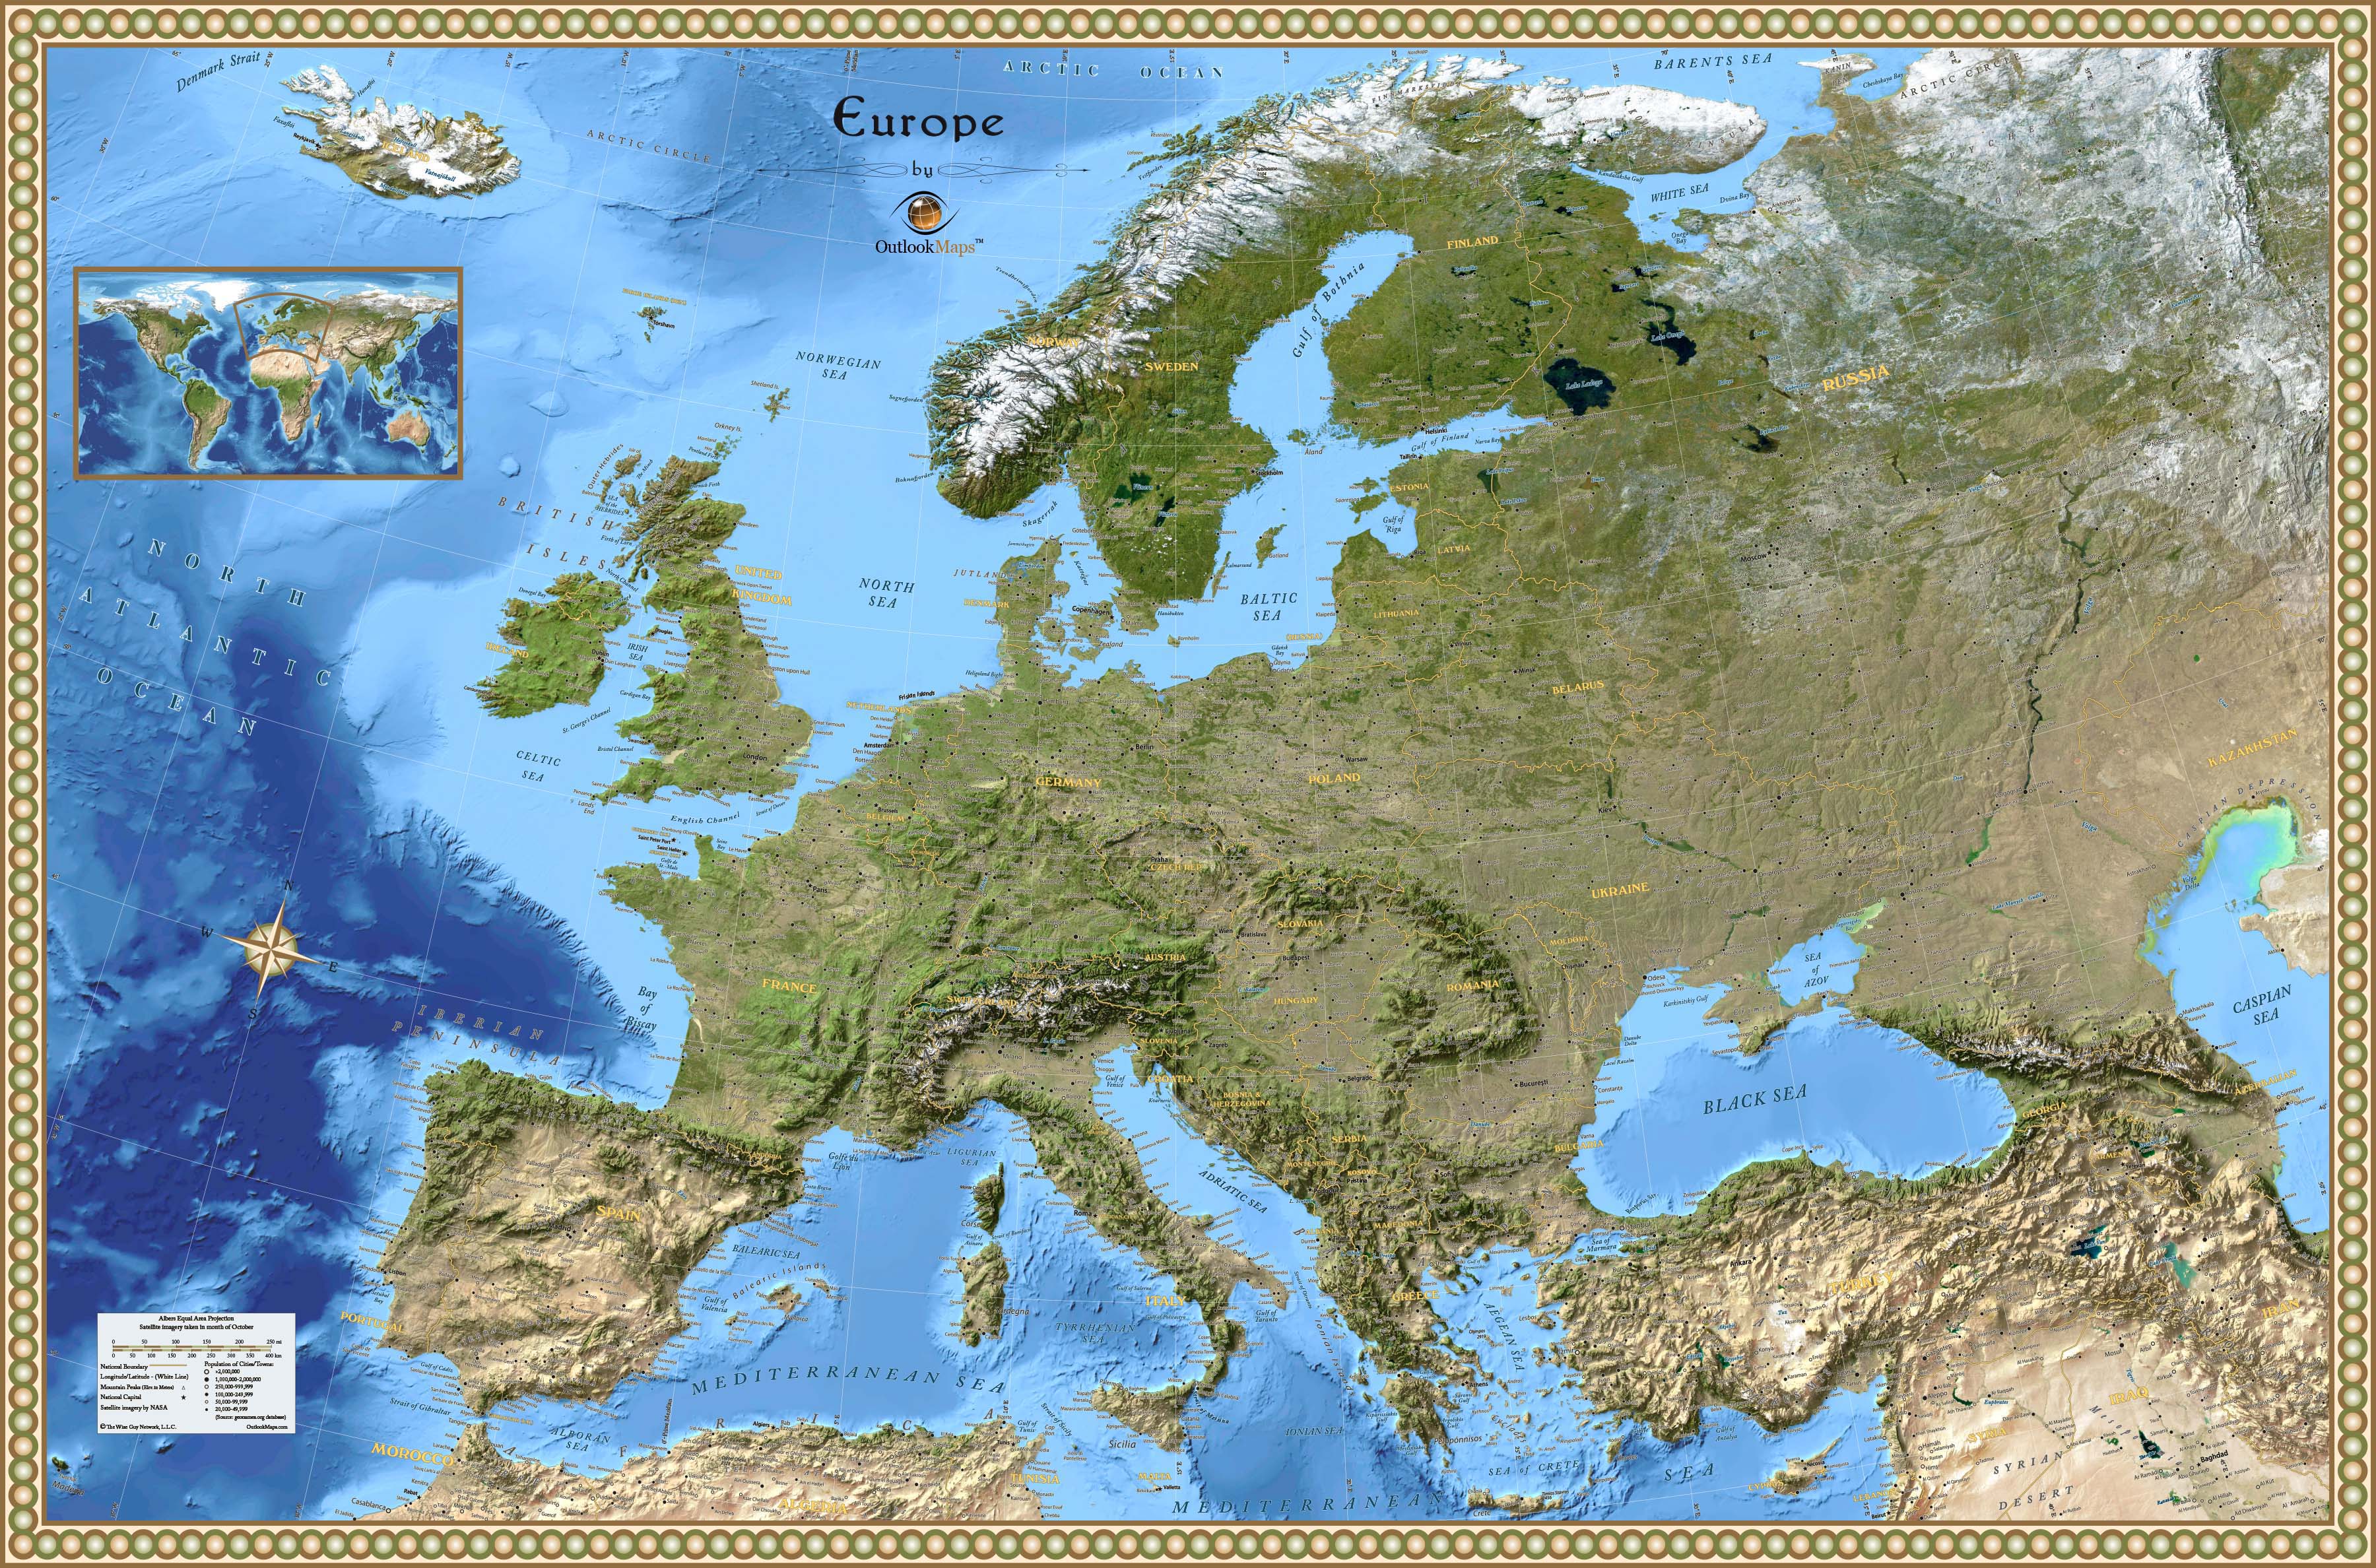 Europe Satellite Wall Map by Outlook Maps